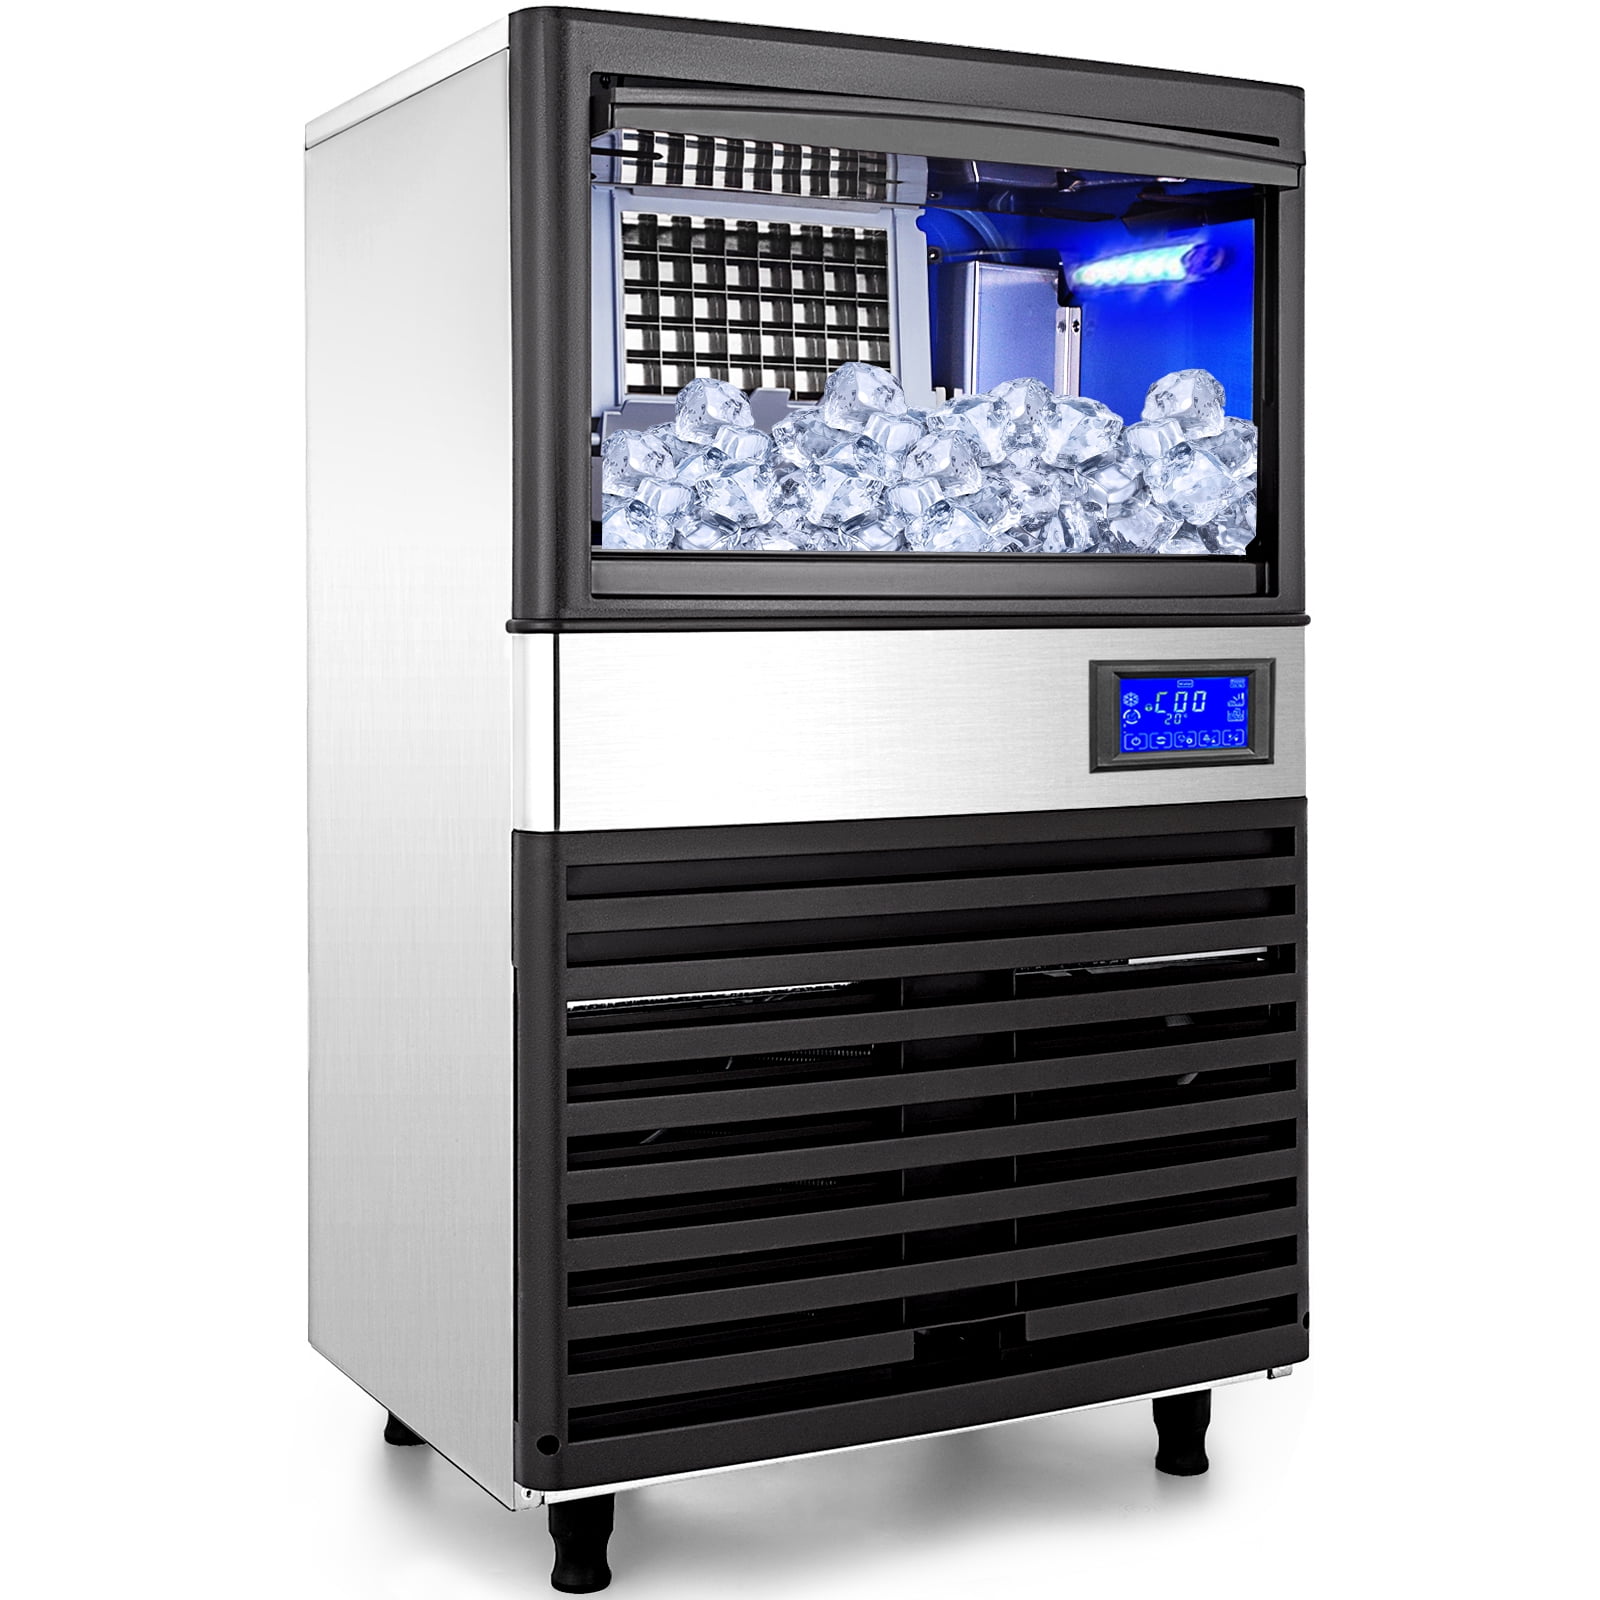 BENTISM New Commercial Ice Maker Auto Clear Cube Ice Making Machine 90-100  lbs 110V 